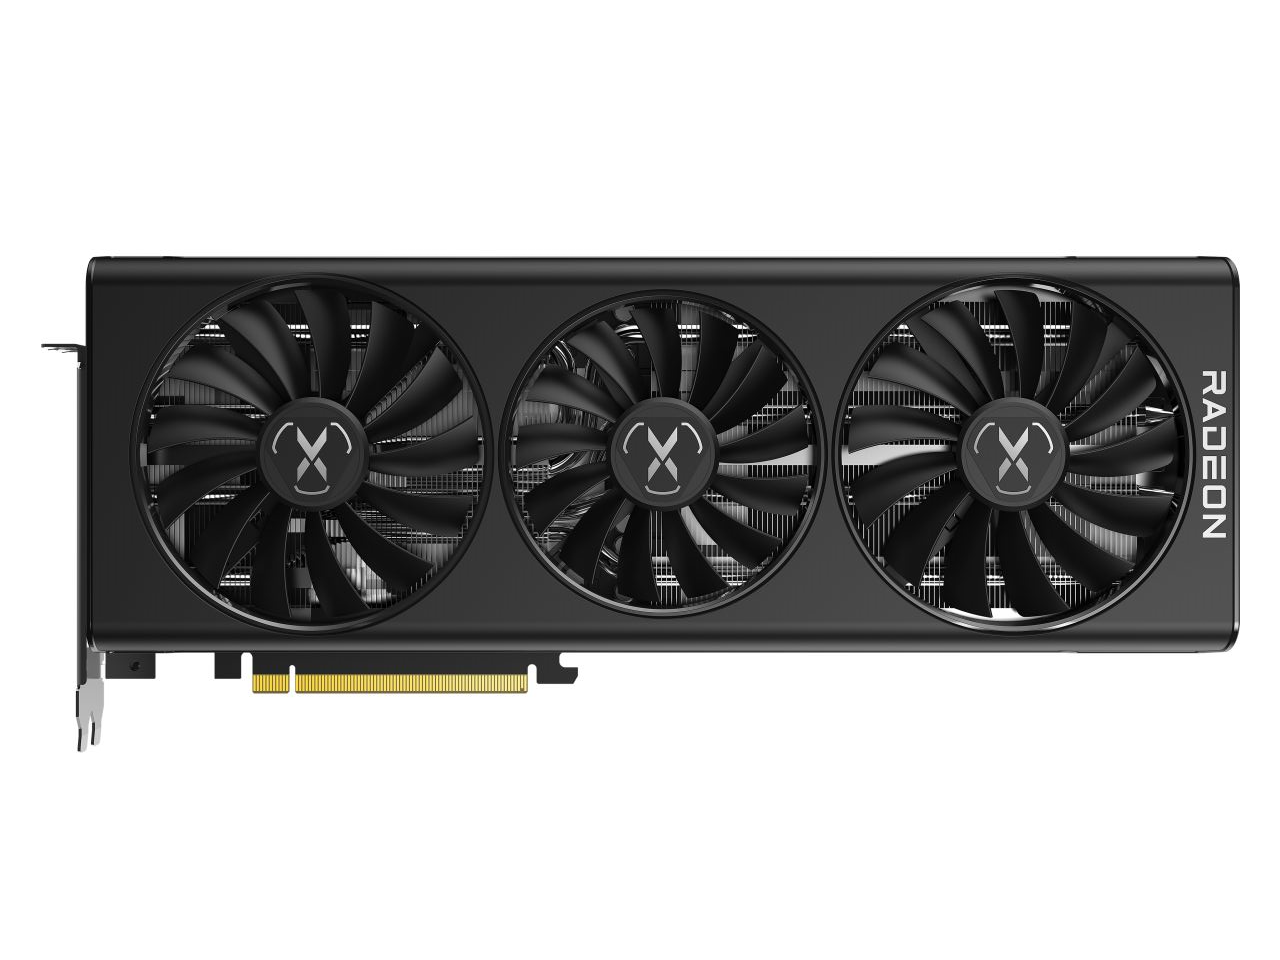 XFX Speedster SWFT319 AMD Radeon RX 6800 Core Gaming Video Graphics Card GPU $360 + Free Shipping